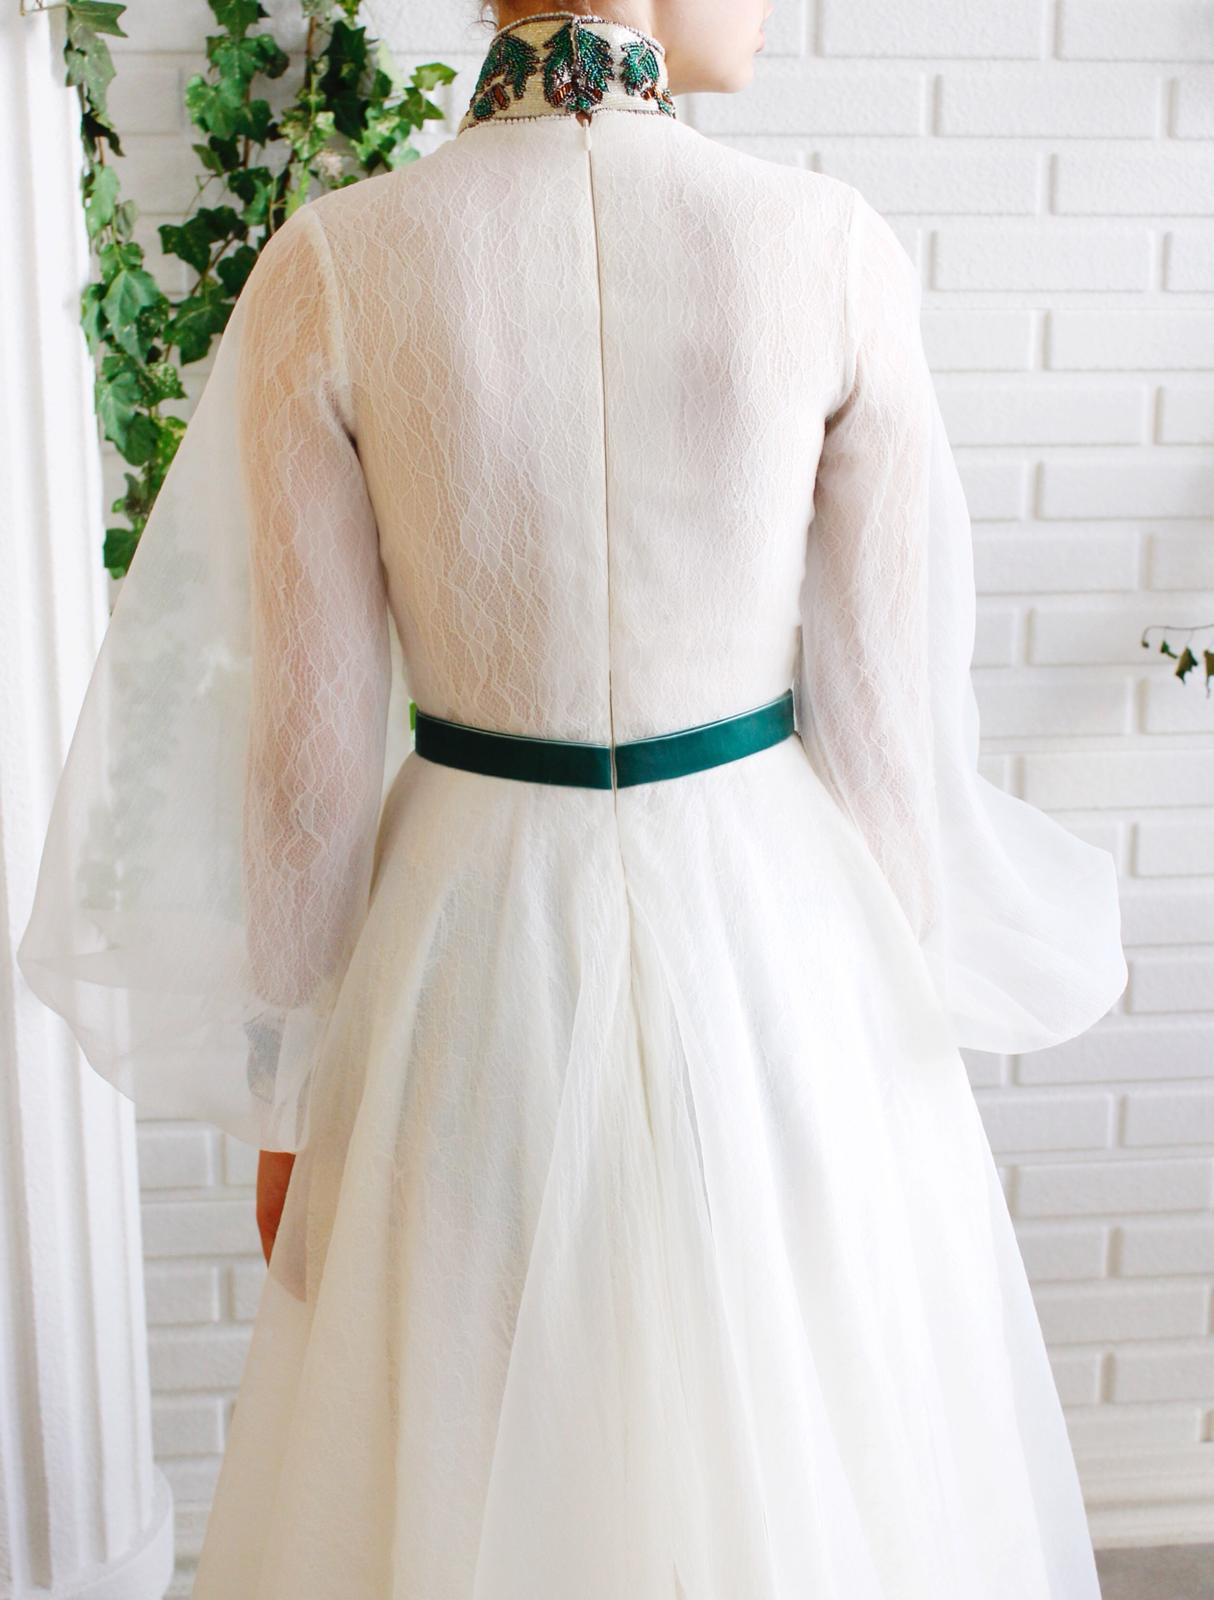 White A-Line dress with long sleeves and embroidery